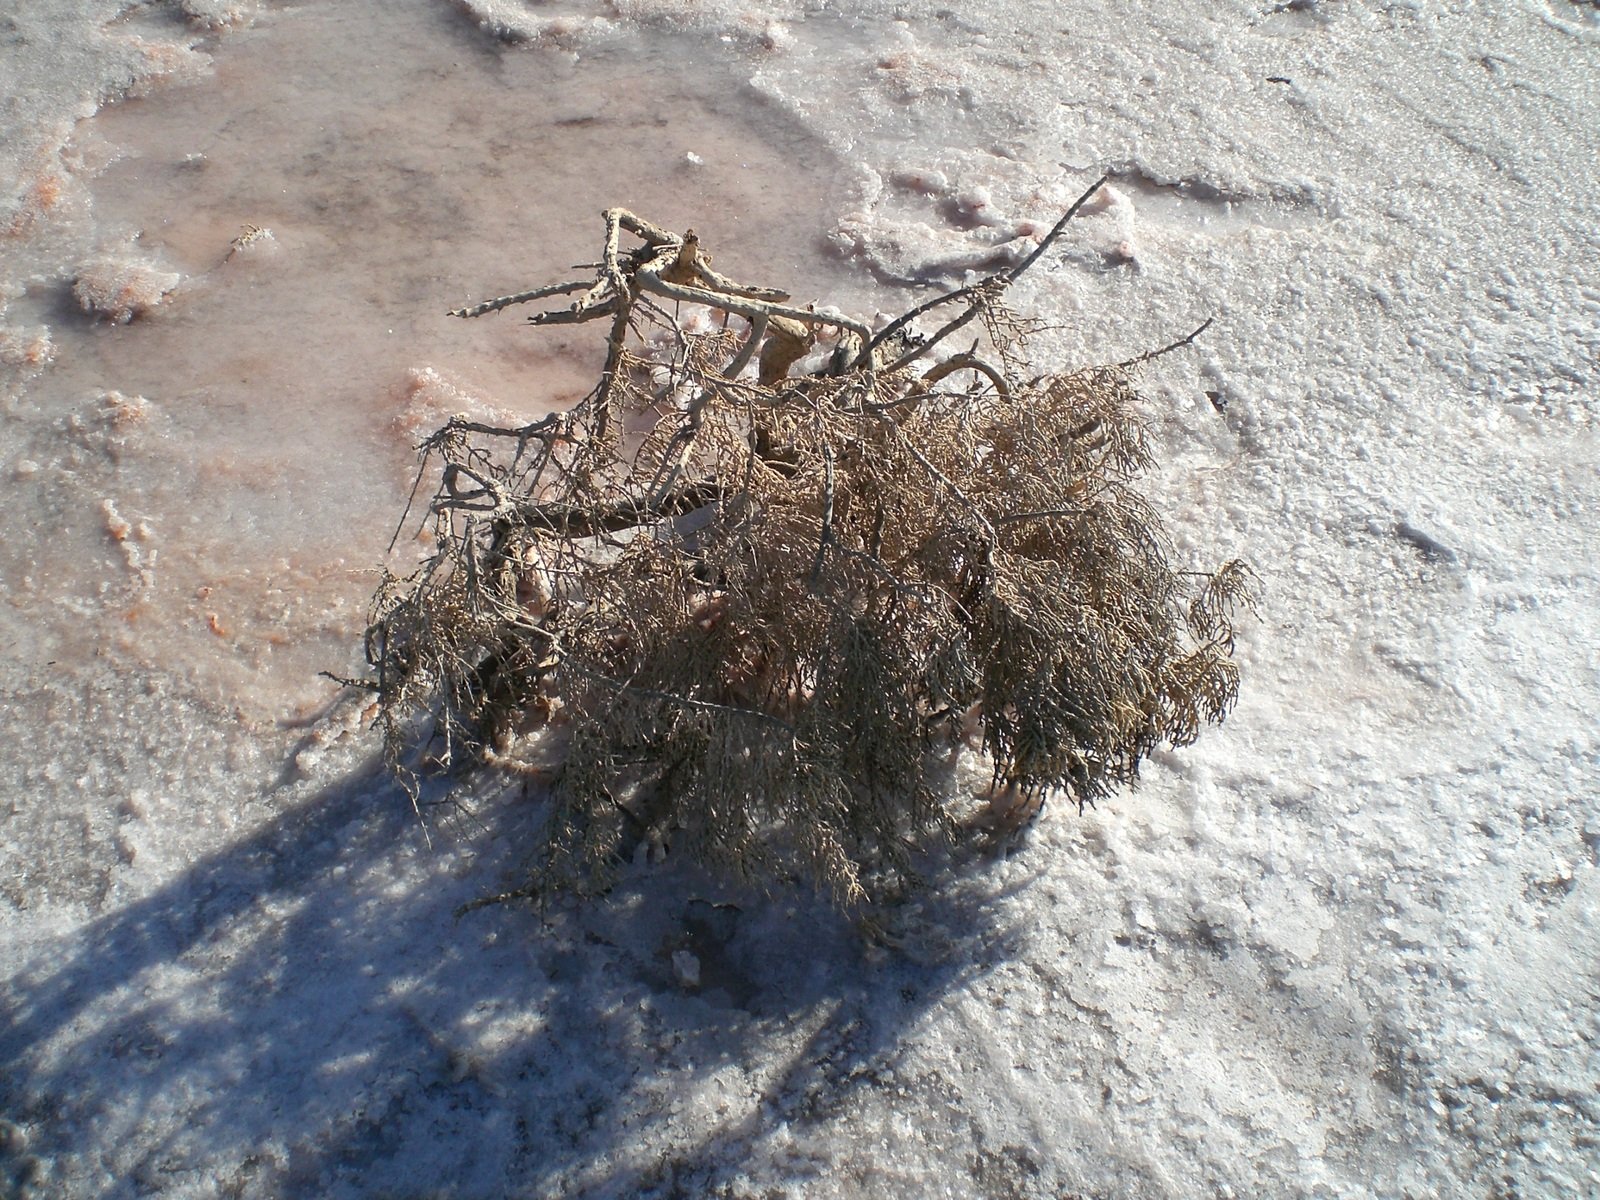 there is a small plant that grows out of the snow